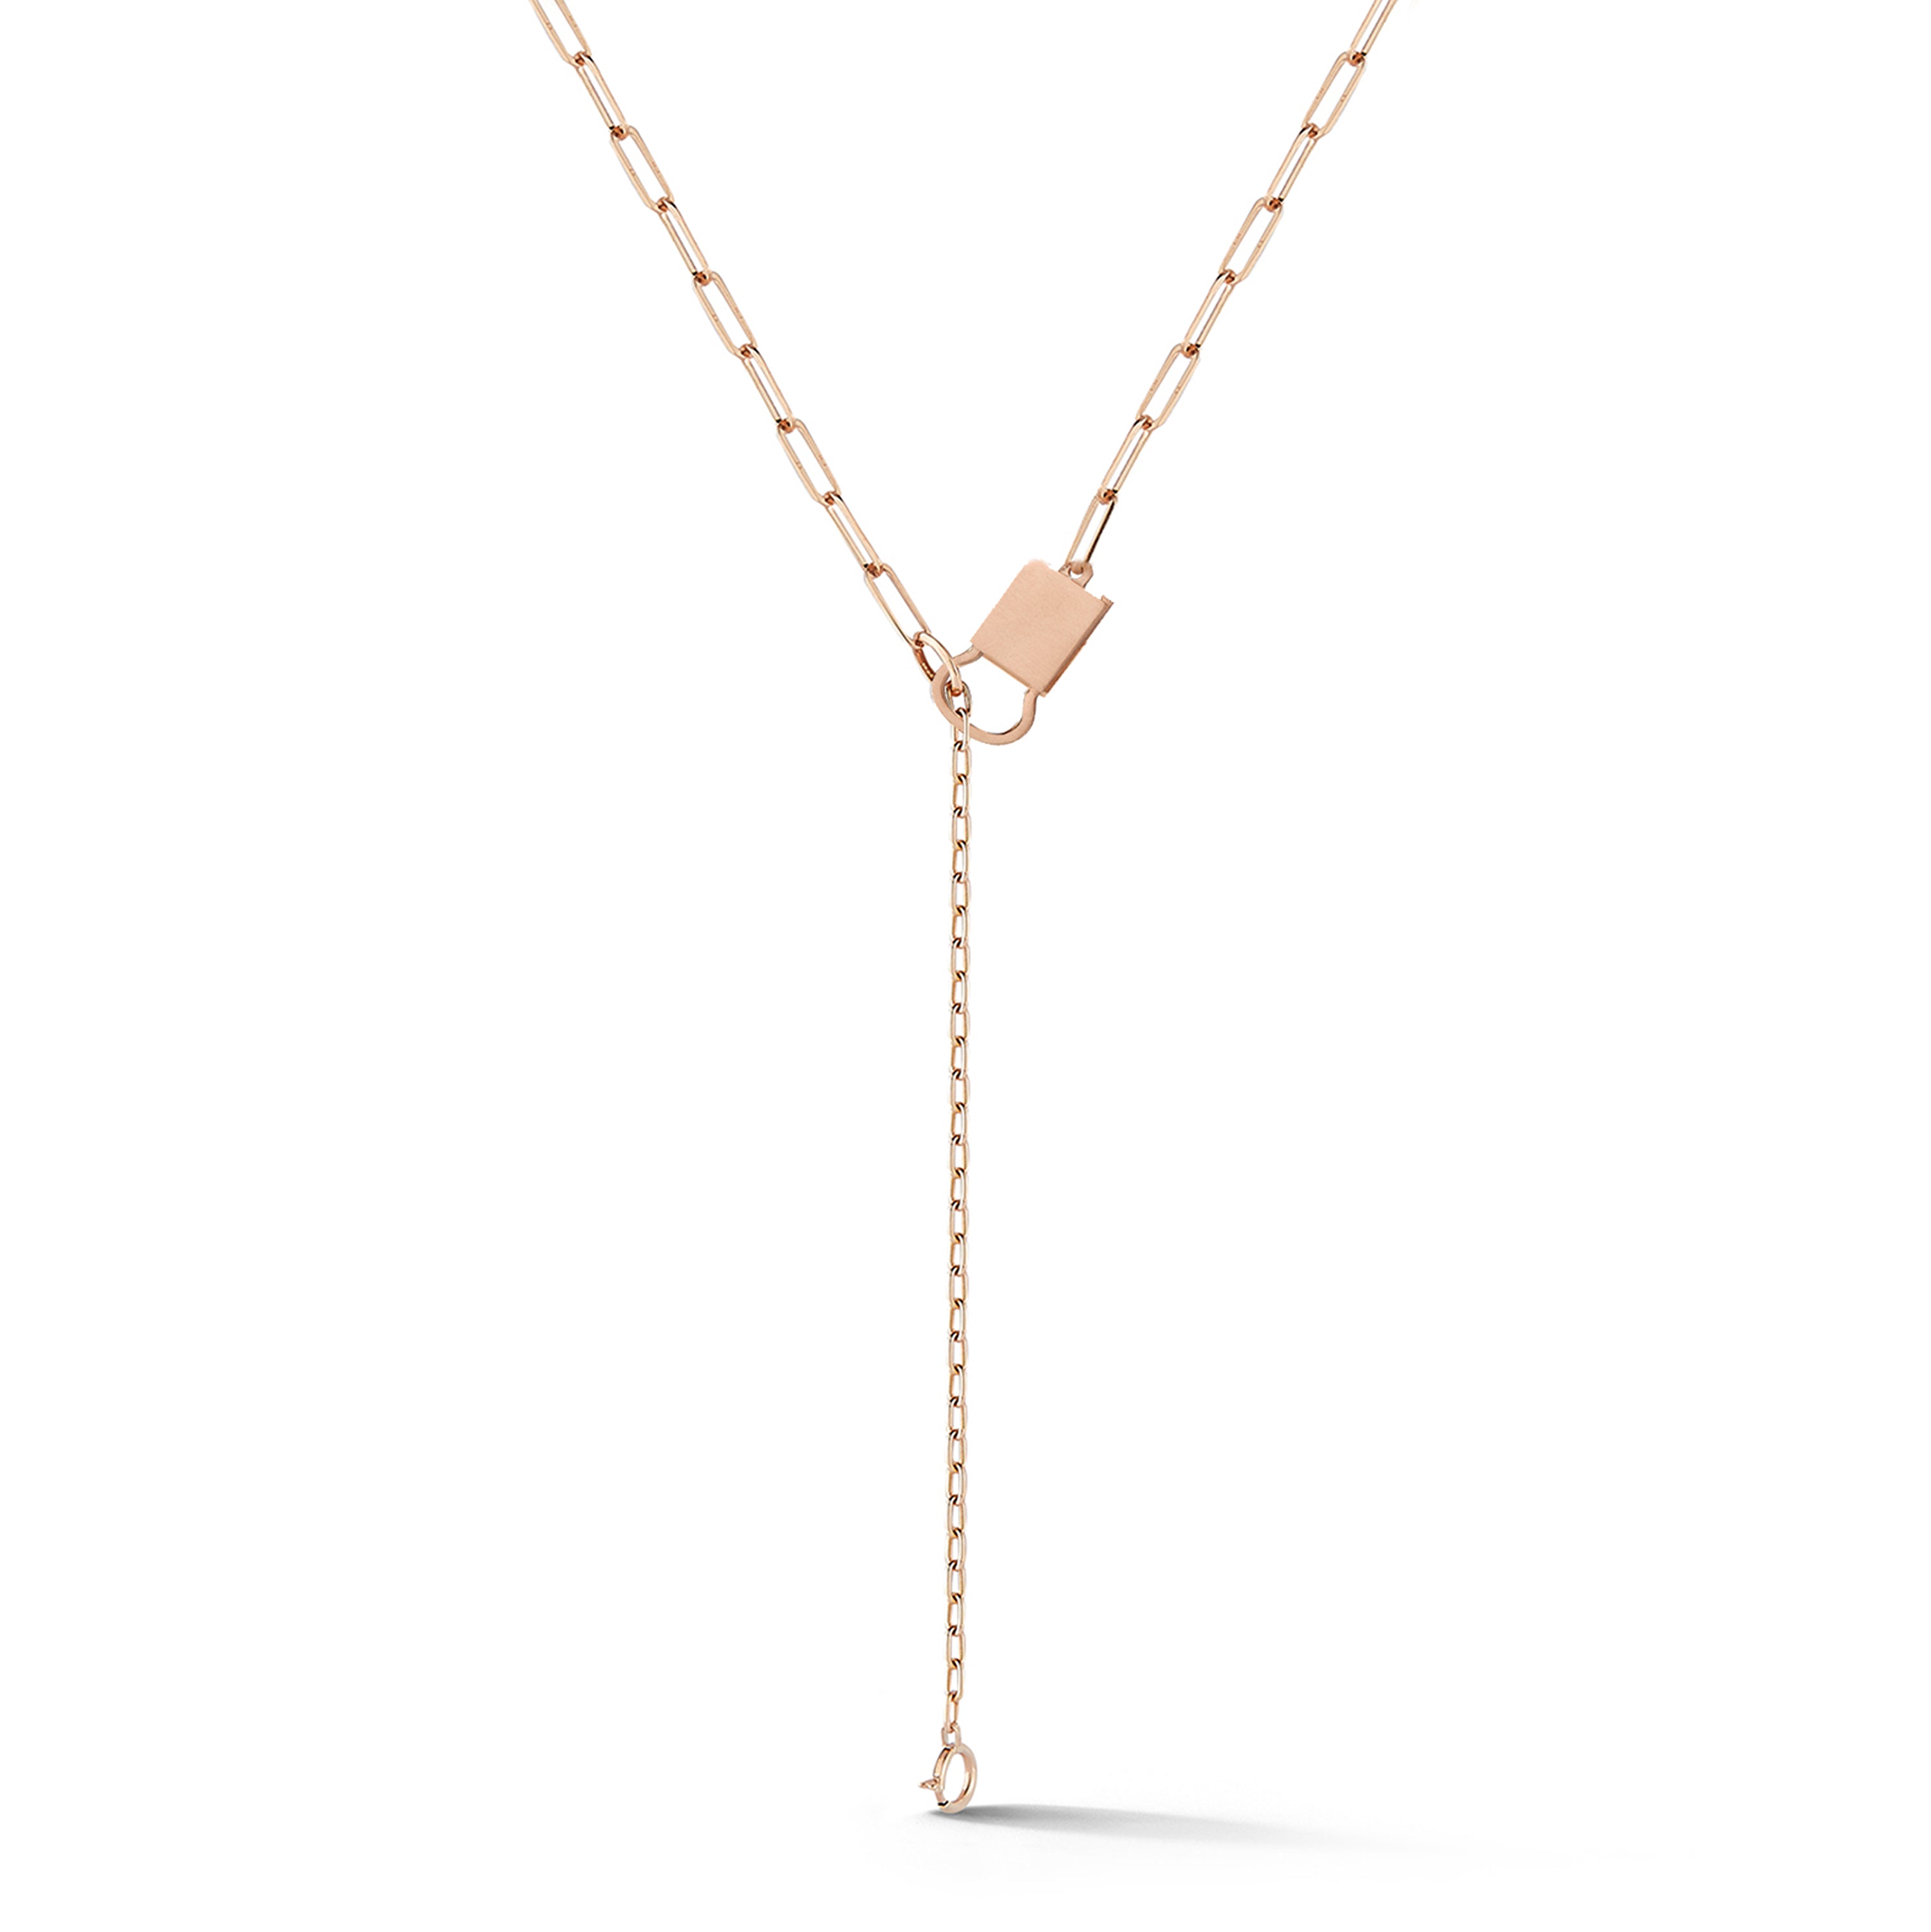 Betty Long Necklace in 18K RoseGold